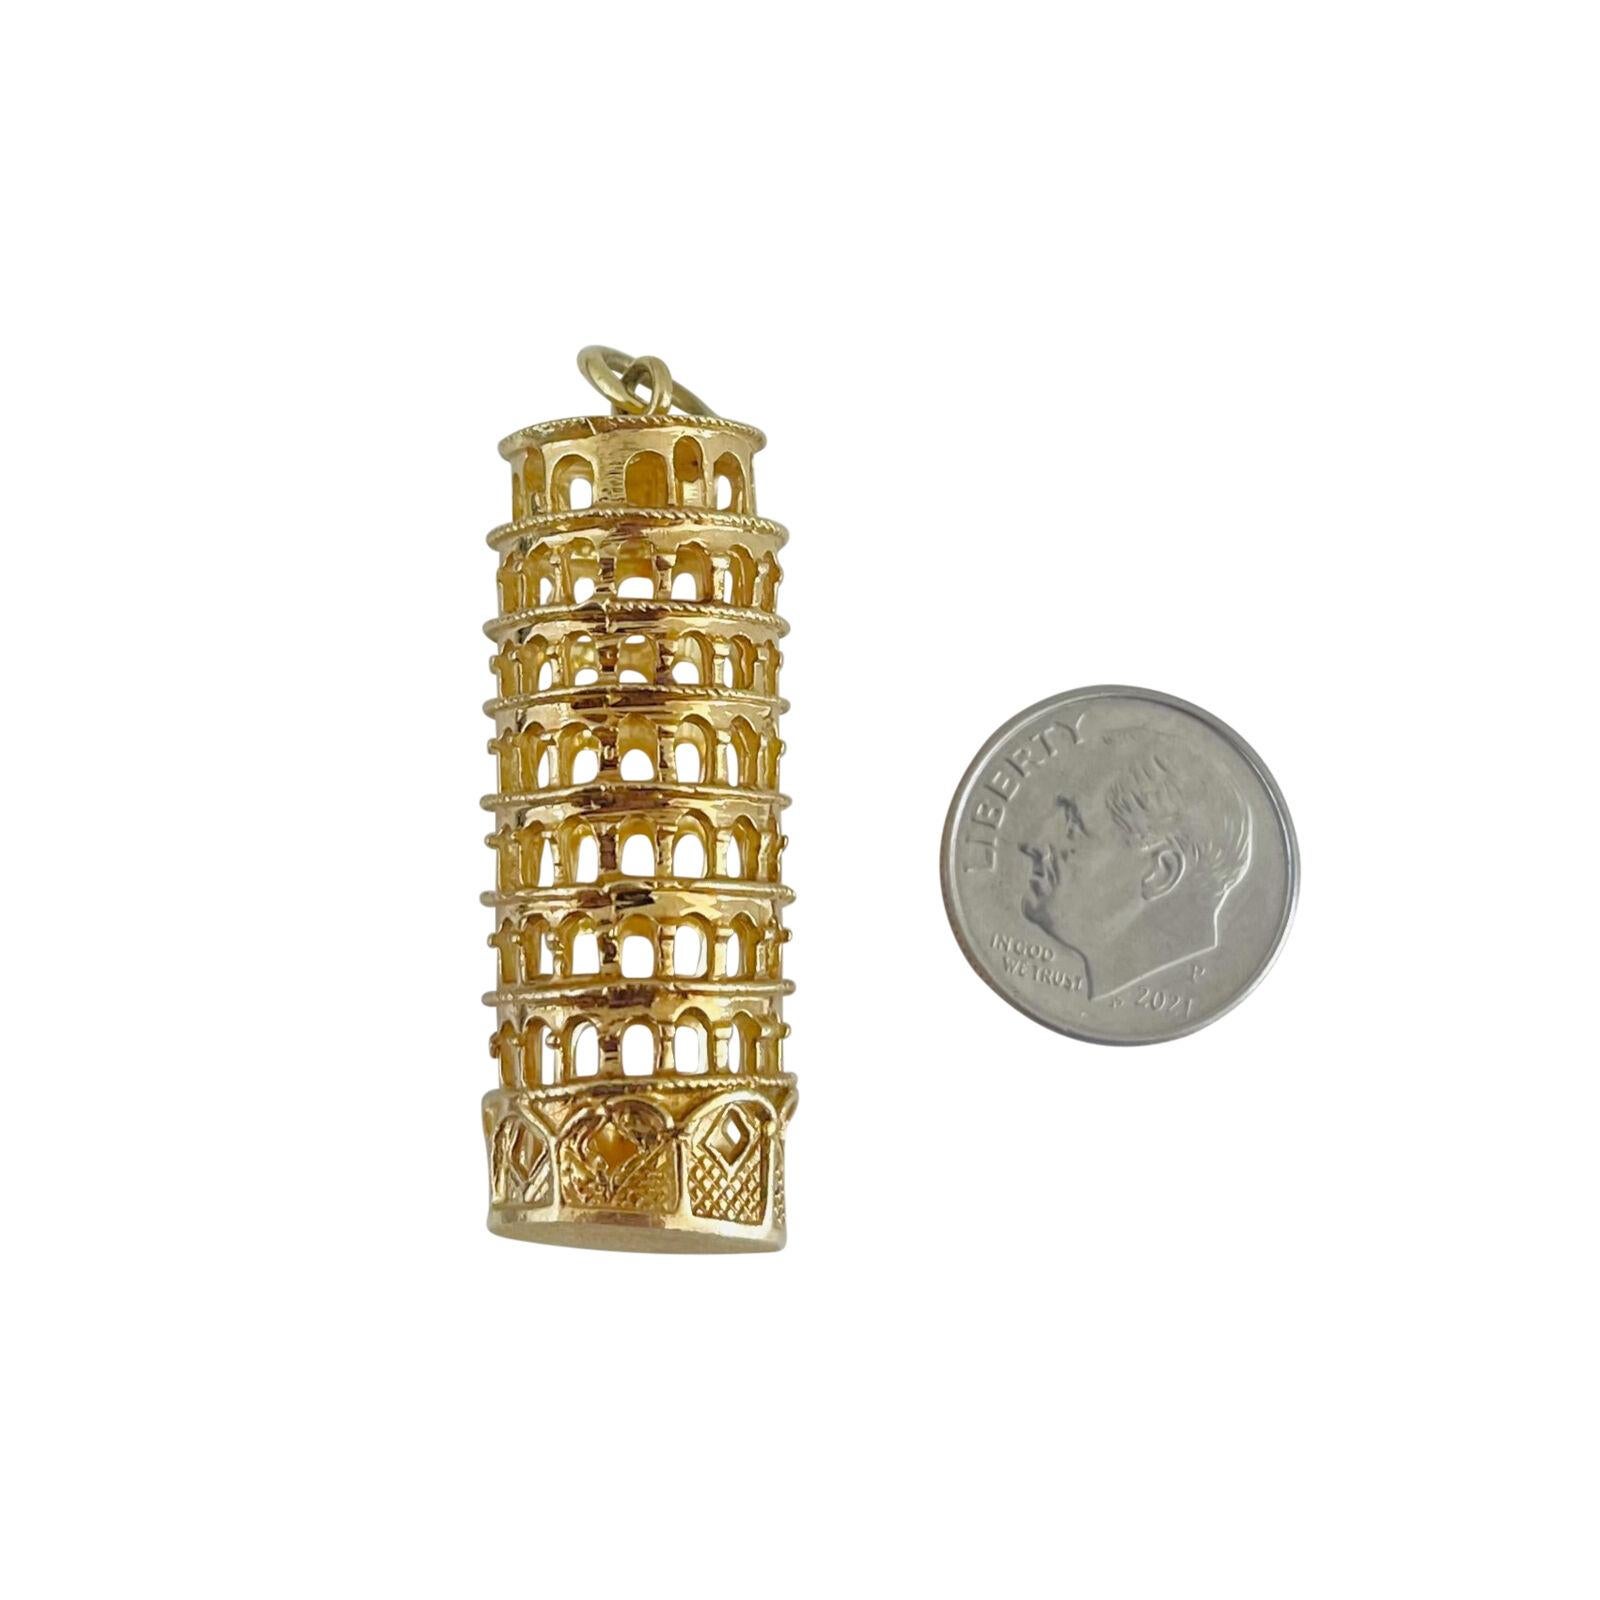 18k Yellow Gold 15g Solid Leaning Tower of Pisa Charm Pendant Italy 1.9